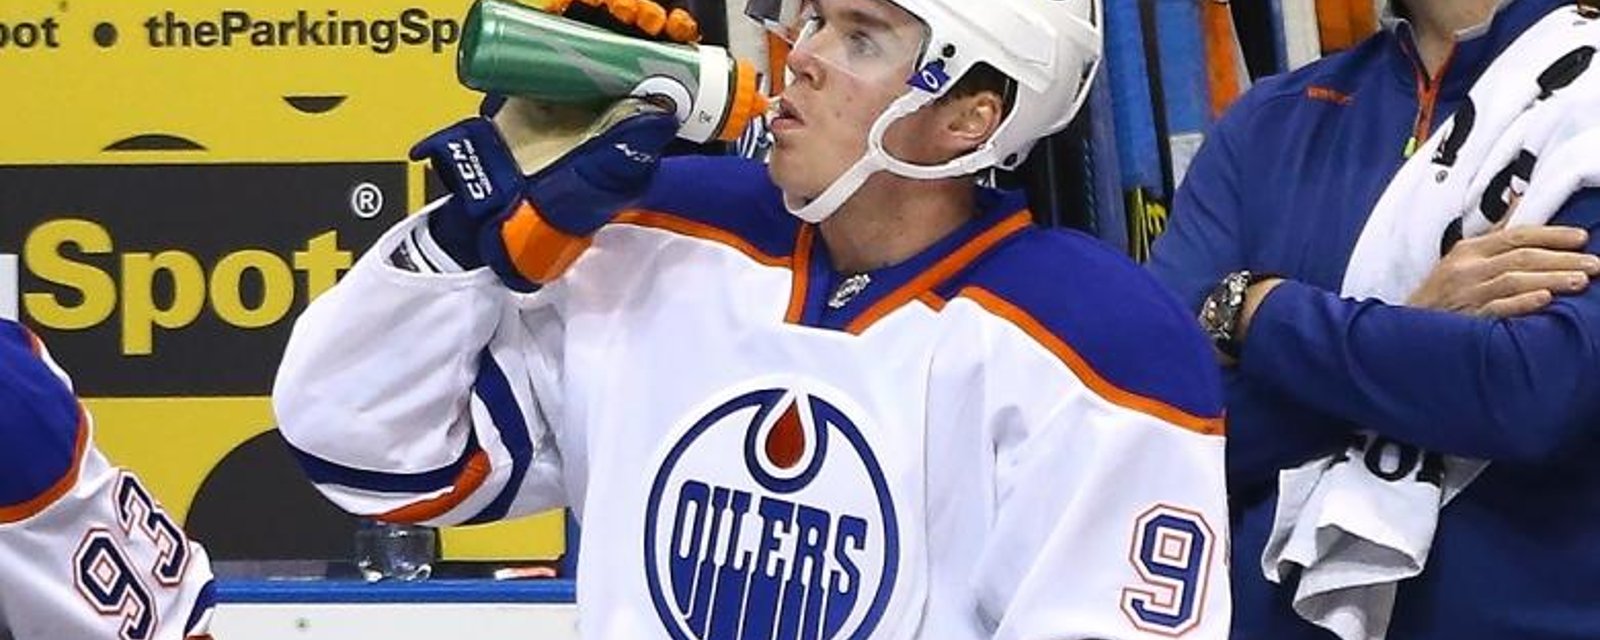 Connor McDavid, in his first game against Eichel, scores in 22 seconds.